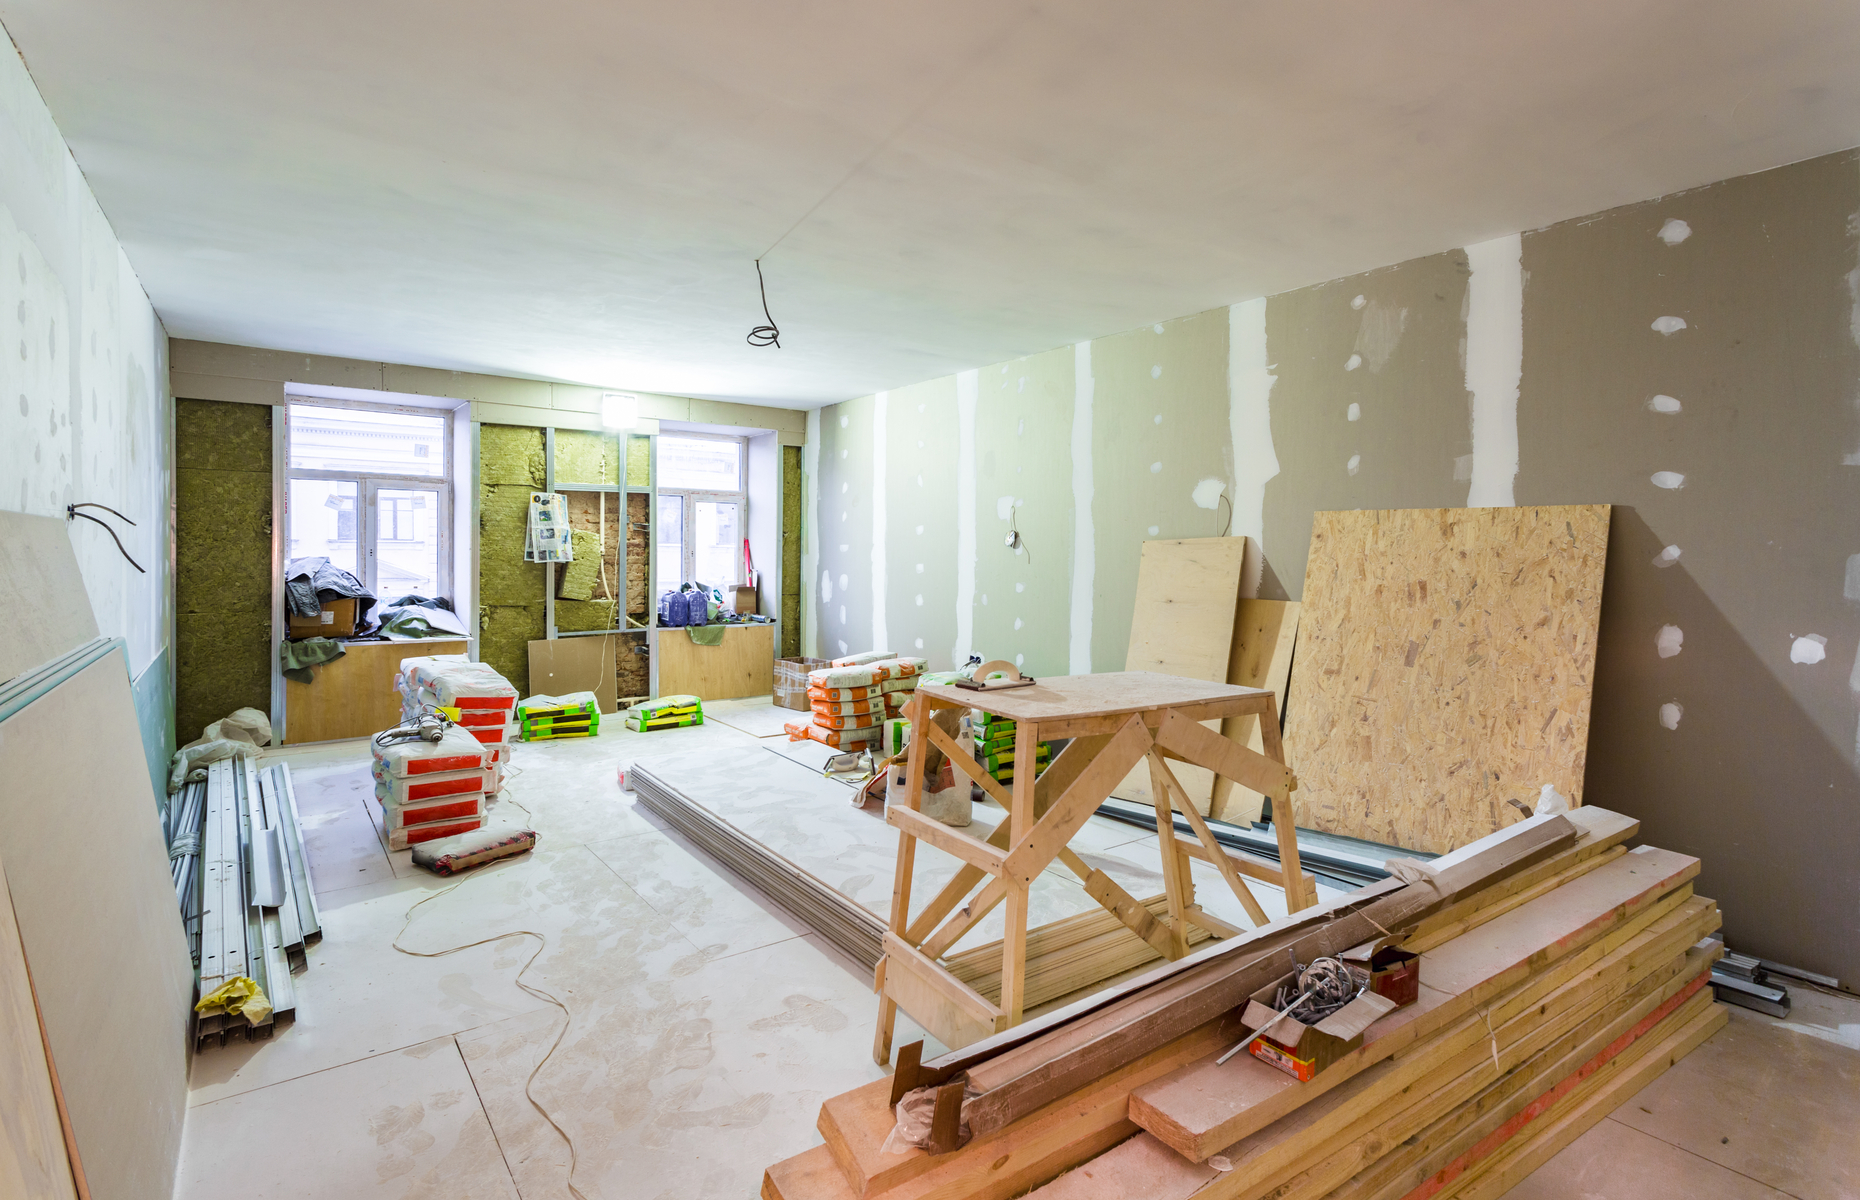 Many residential renovation projects will need to be put on hold during lockdown. Image: Zakhar Mar / Shutterstock